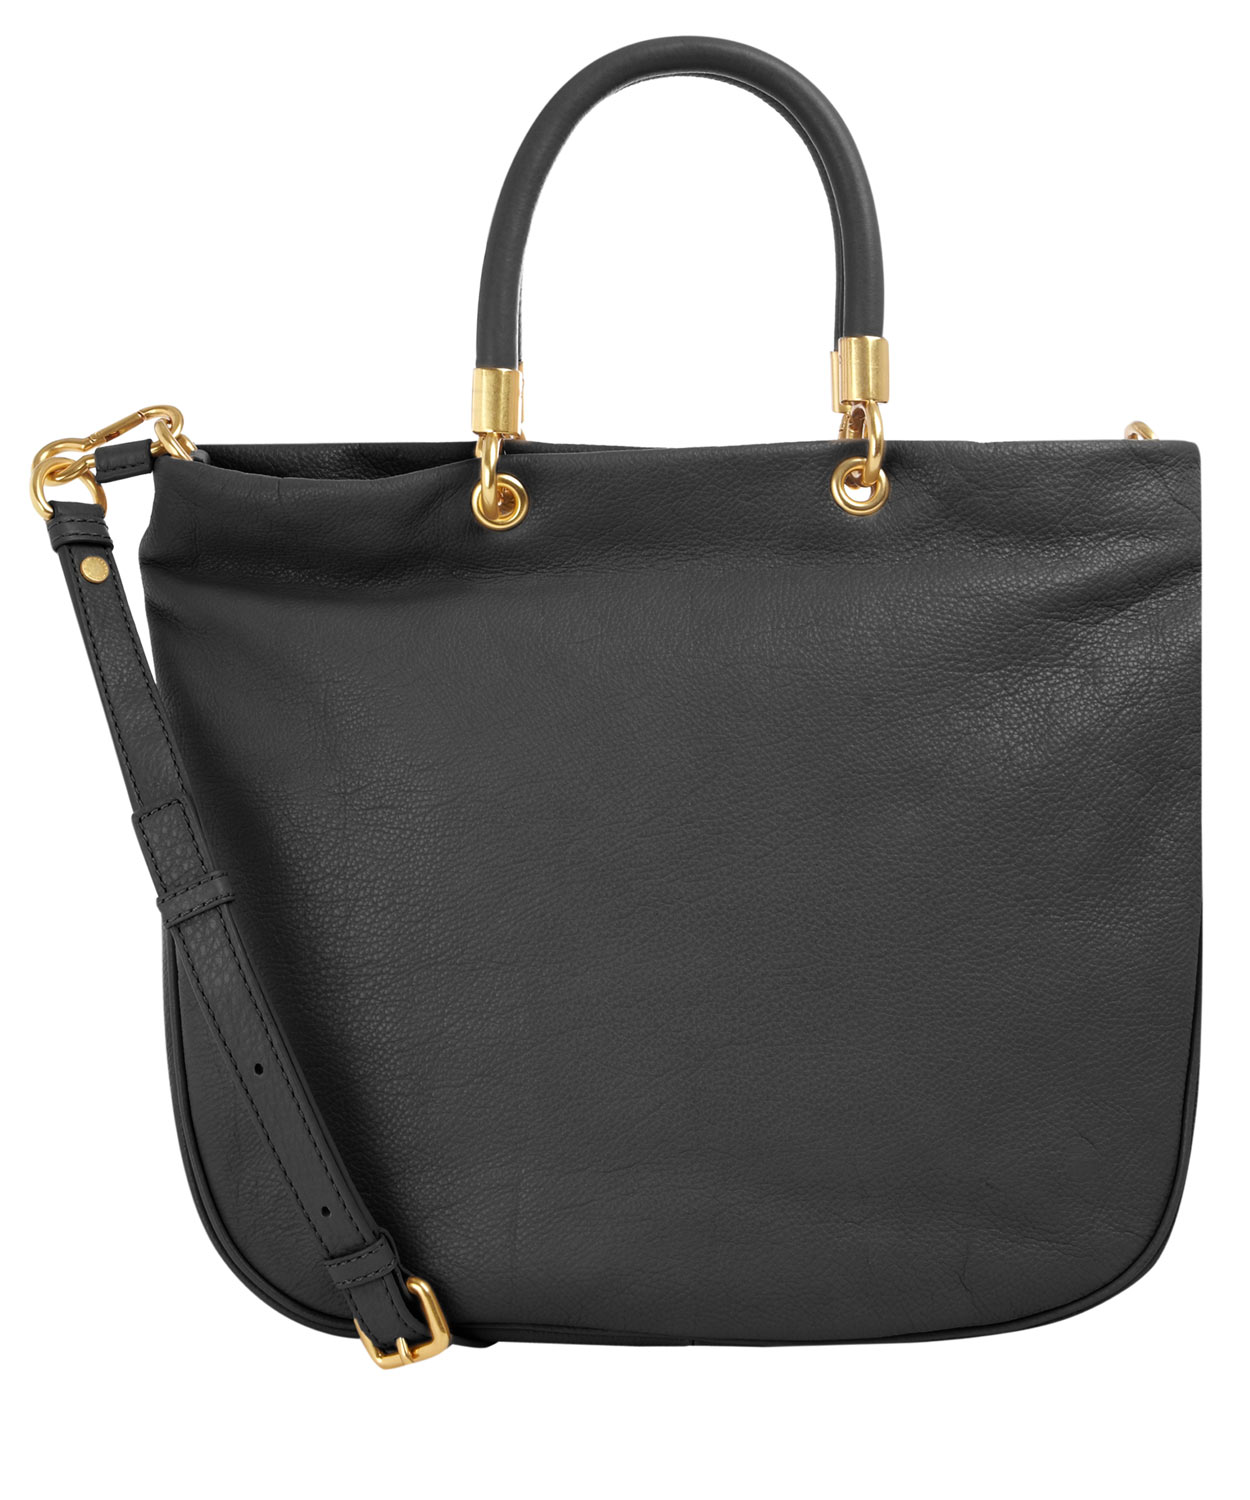 Lyst - Marc by marc jacobs Black Too Hot To Handle Mini Shopper Tote ...